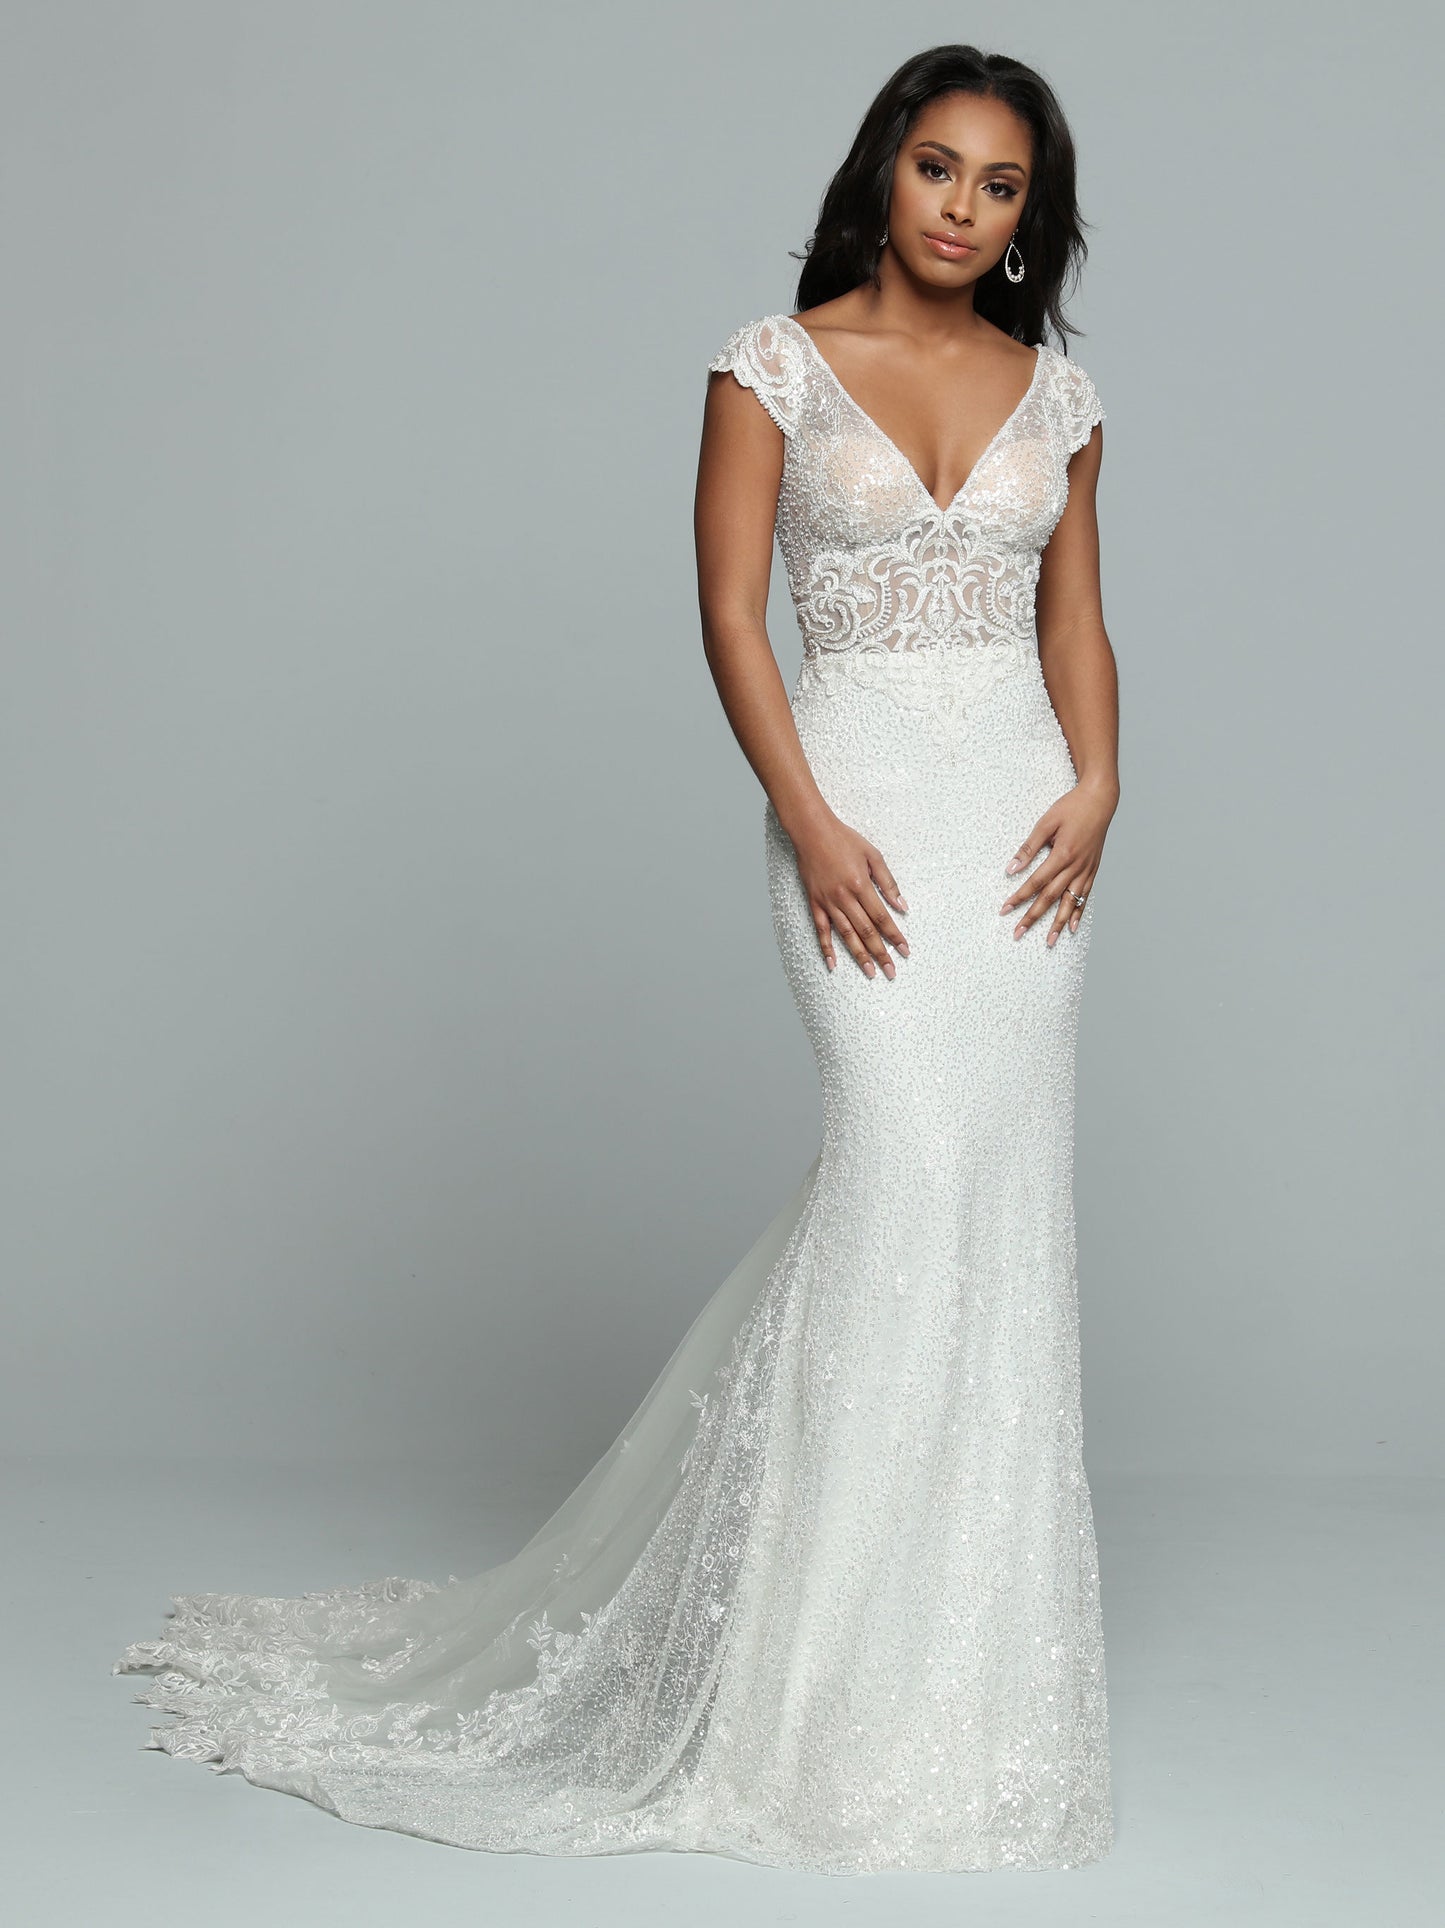 Davinci Bridal 50666 Long Sheer Sequin Mermaid Wedding Dress Lace Train Gown Sparkling Sequin Fit & Flare Sheath Wedding Dress features a Sheer Bodice with V-Neckline & Deep V-Back. Beaded Lace Applique covers the Bodice & Wide Off the Shoulder Straps. The Skirt has a Sheer Back Panel that ass Fullness to the Lace Edged Sheer Chapel Train.